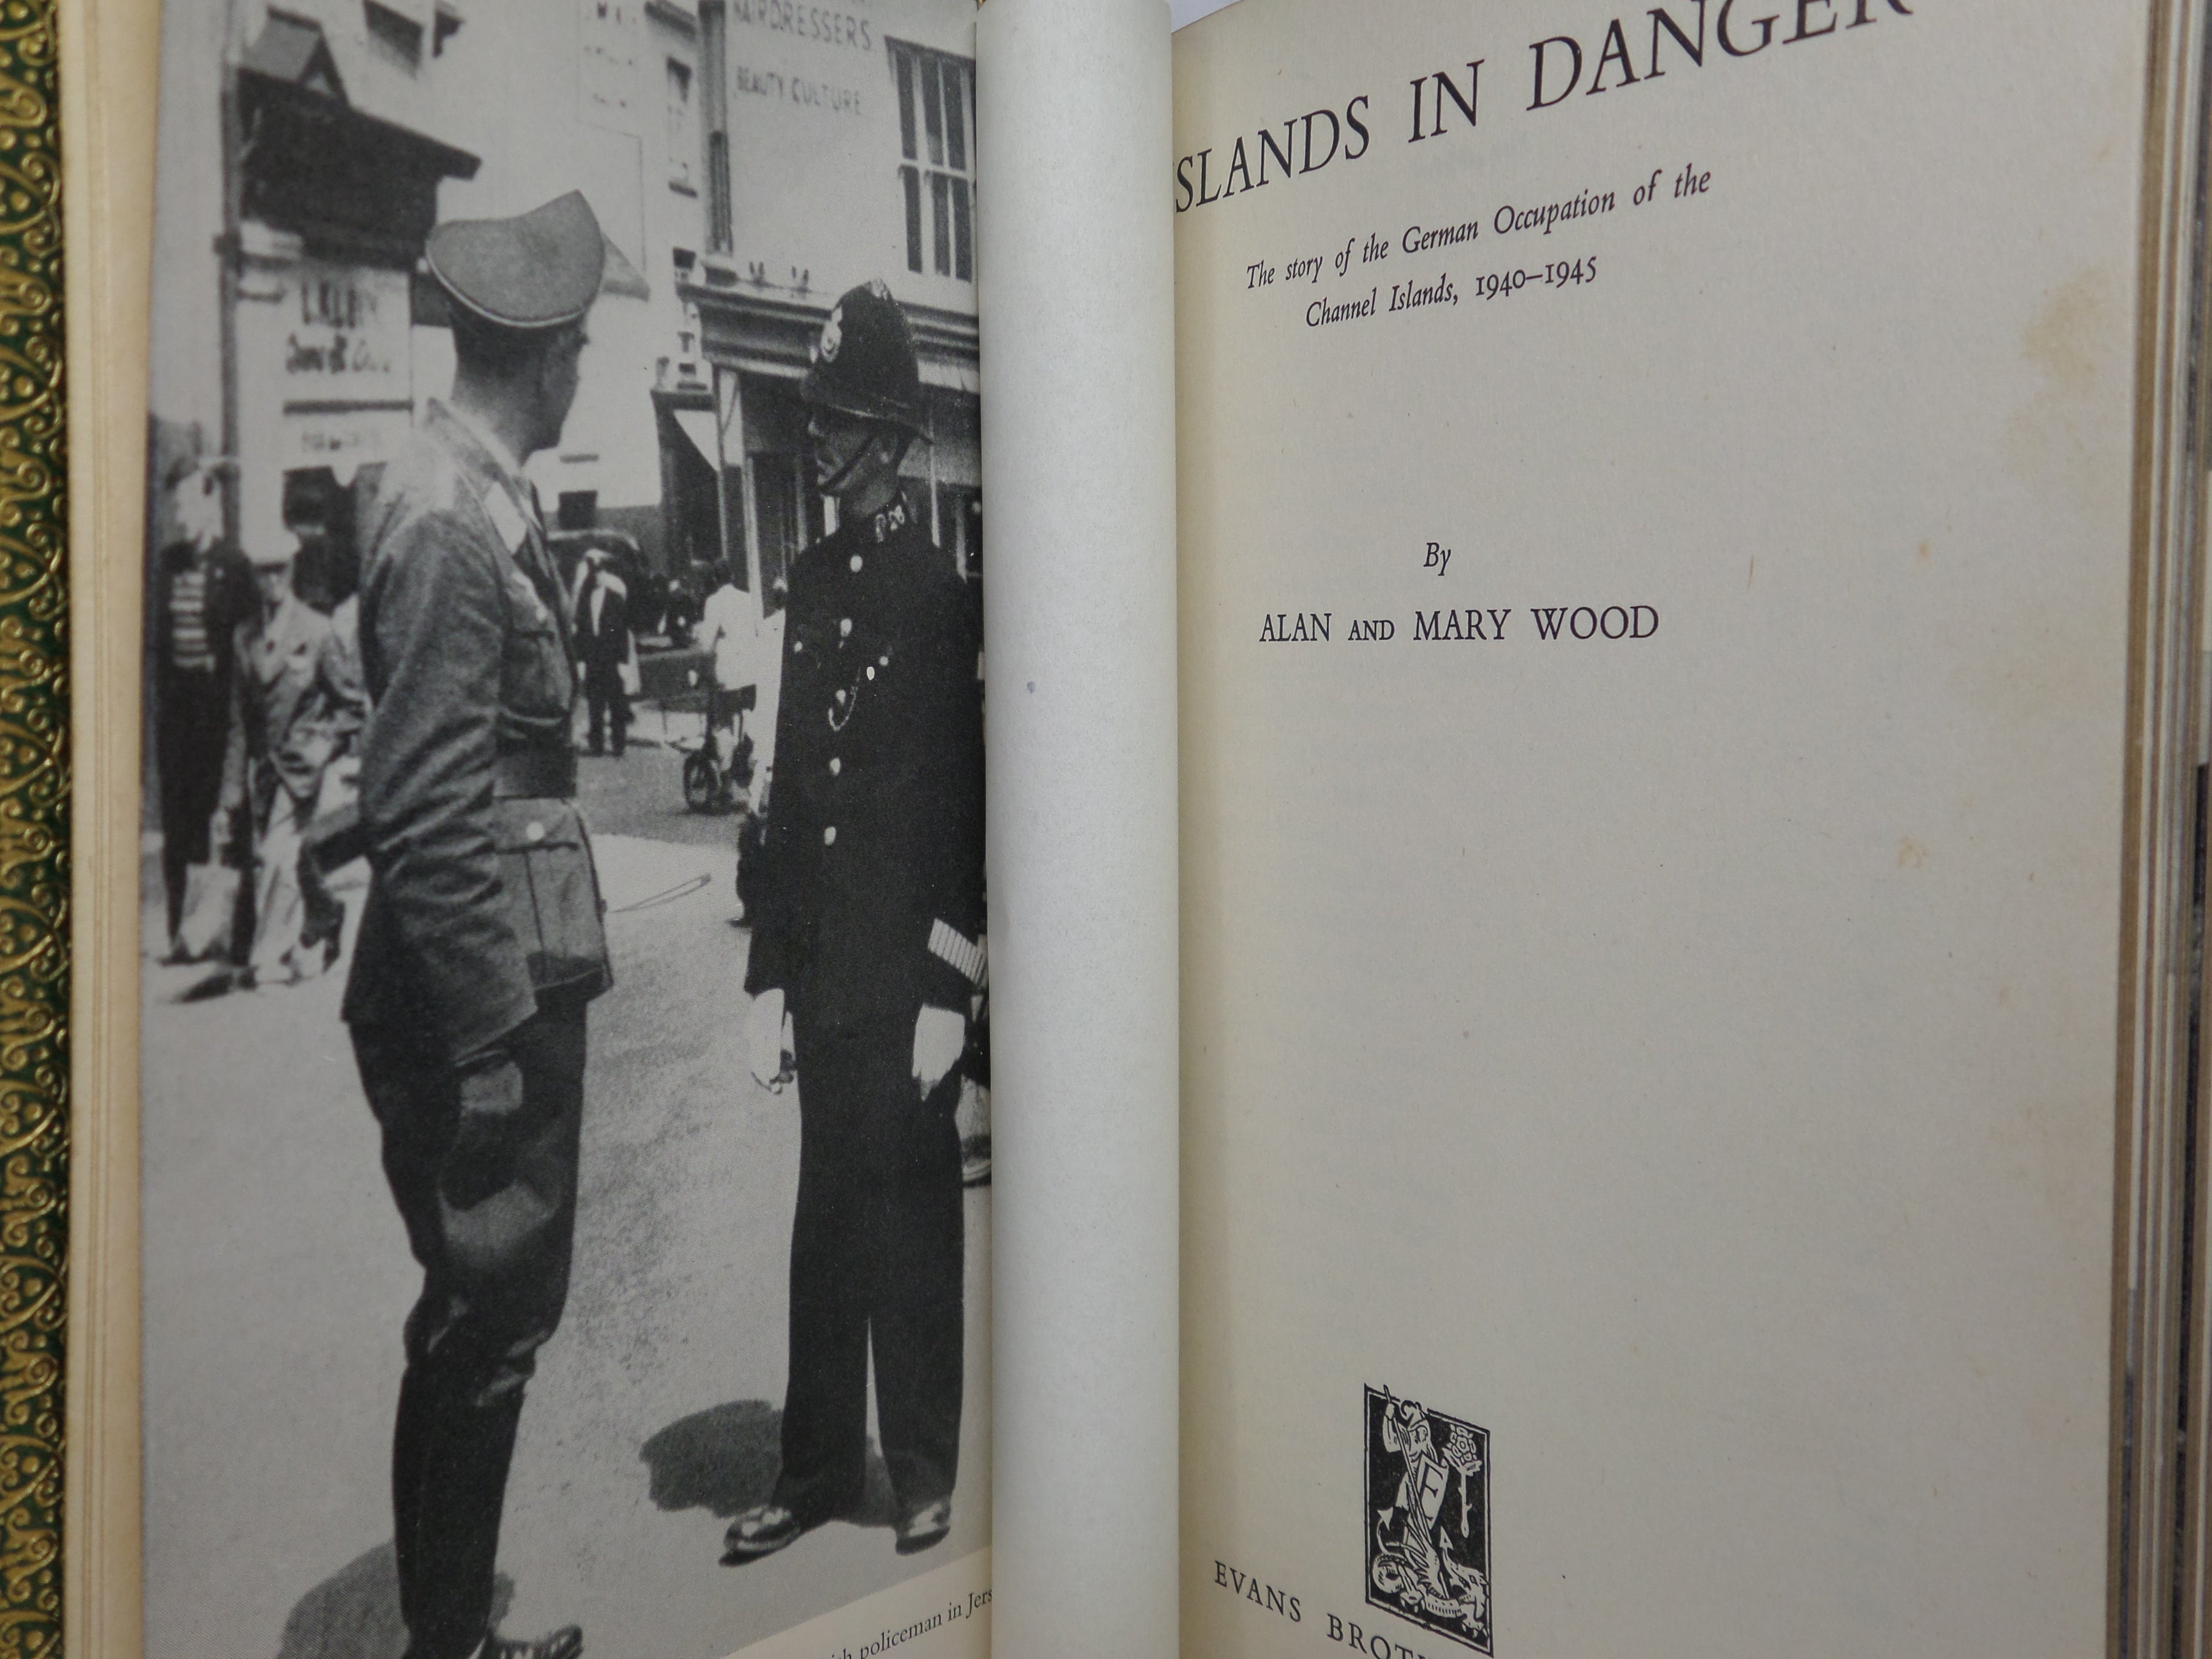 ISLANDS IN DANGER: THE STORY OF THE GERMAN OCCUPATION OF THE CHANNEL ISLANDS 1940-1945 BY ALAN & MARY WOOD 1955 FIRST EDITION, FINE BINDING